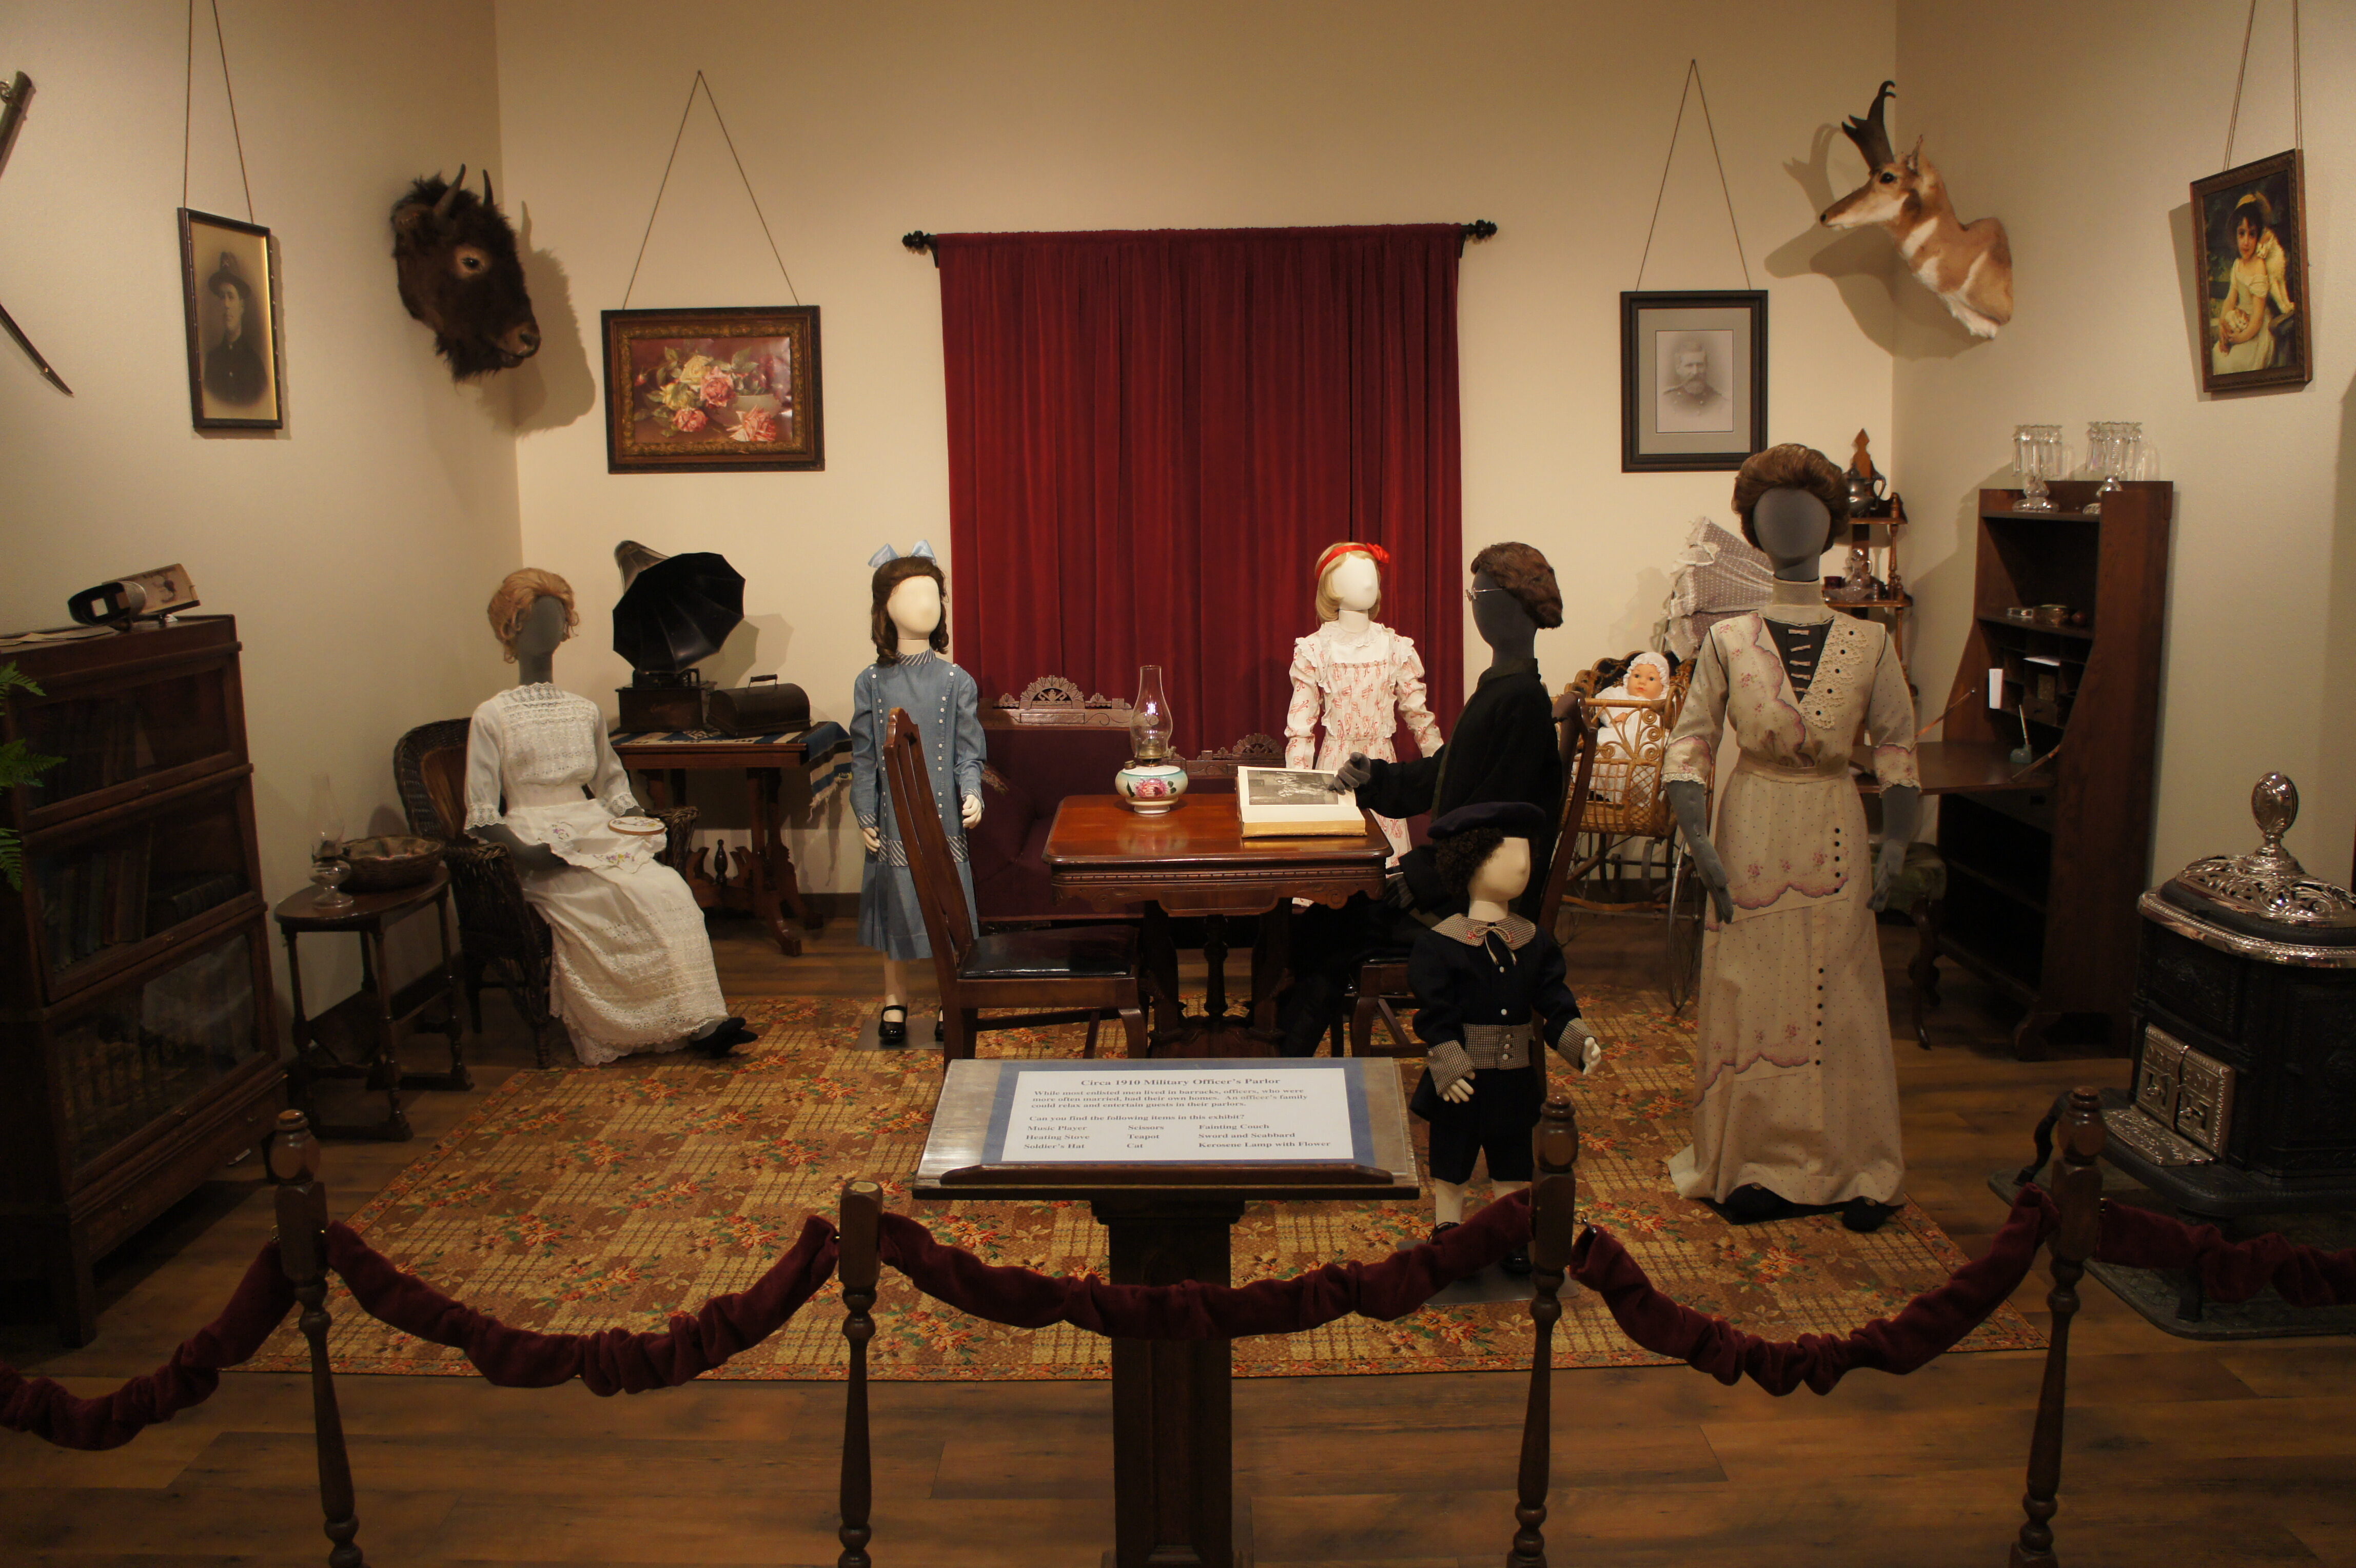 Military officer's parlor with mannequins and furniture pieces that date to 1910.